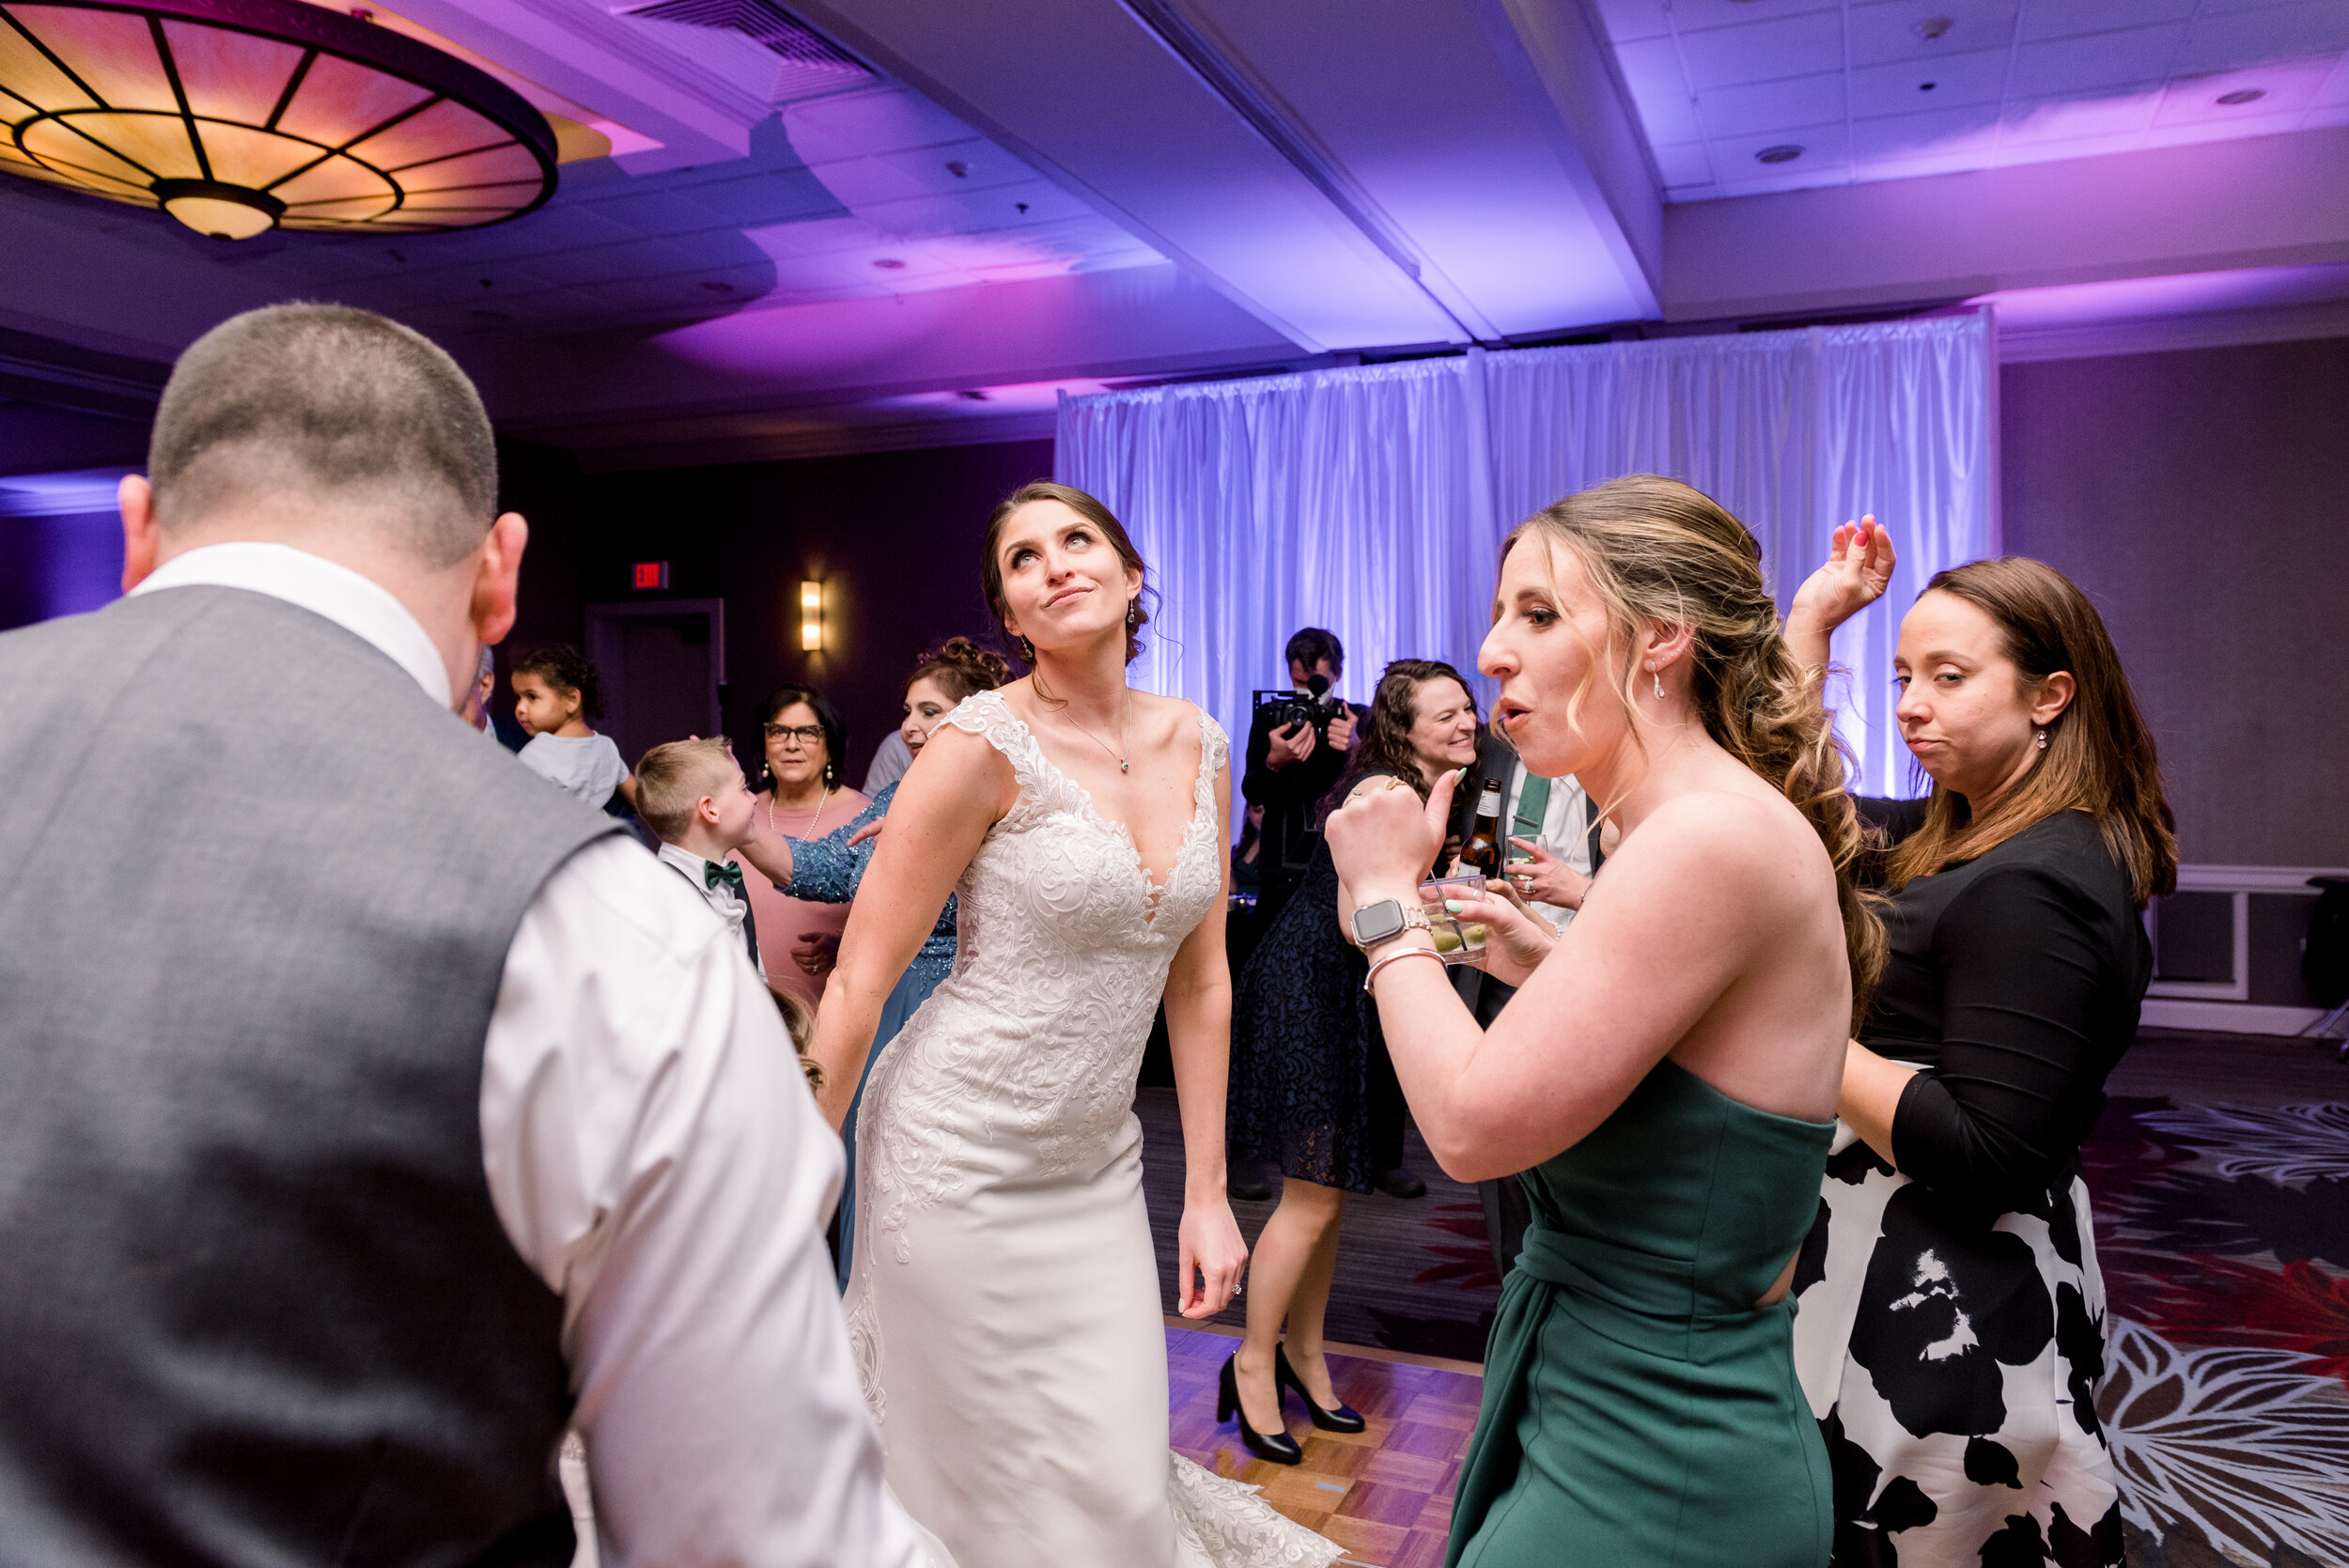 Weddings-at-The-DoubleTree-by-Hilton-Hotel-Pittsburgh-Ashley-Reed-Photography-91.jpg